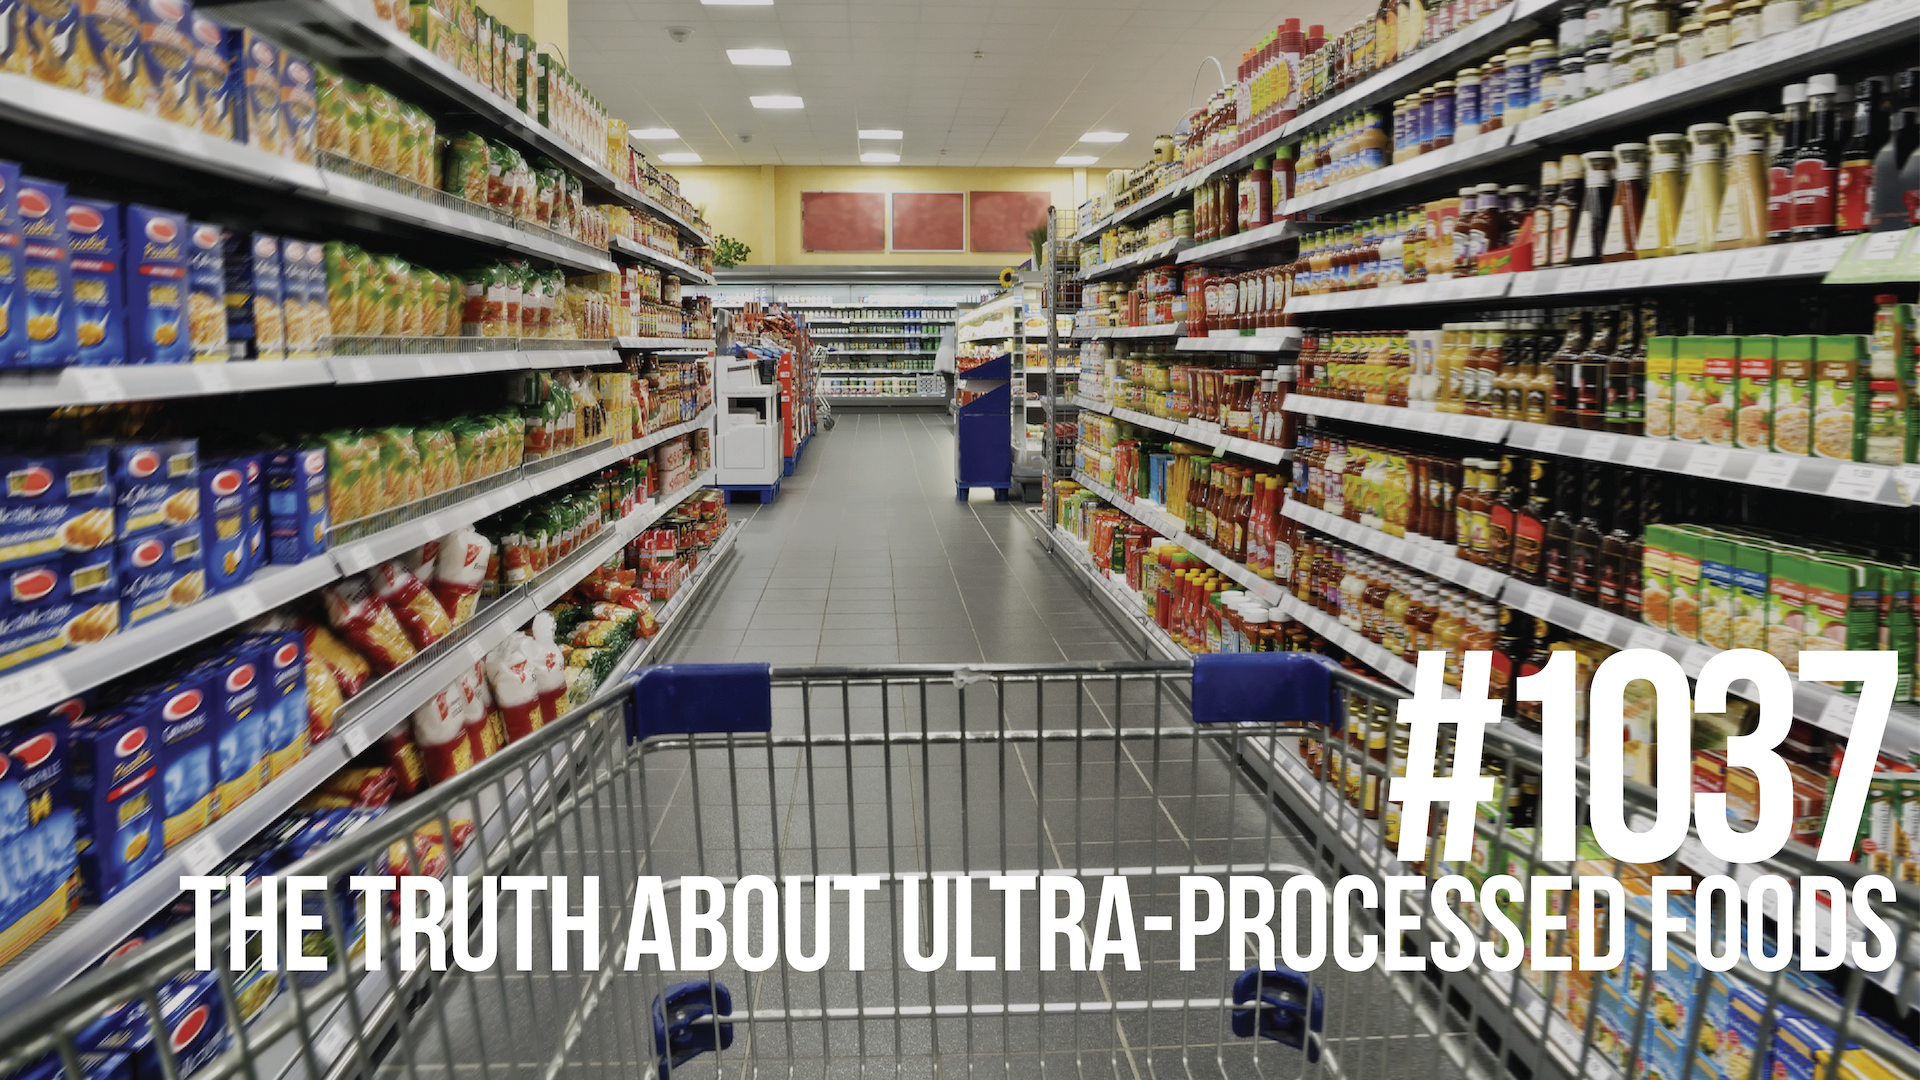 1037: How Ultra-Processed Foods Are Making You Fat, Sick, & Weak